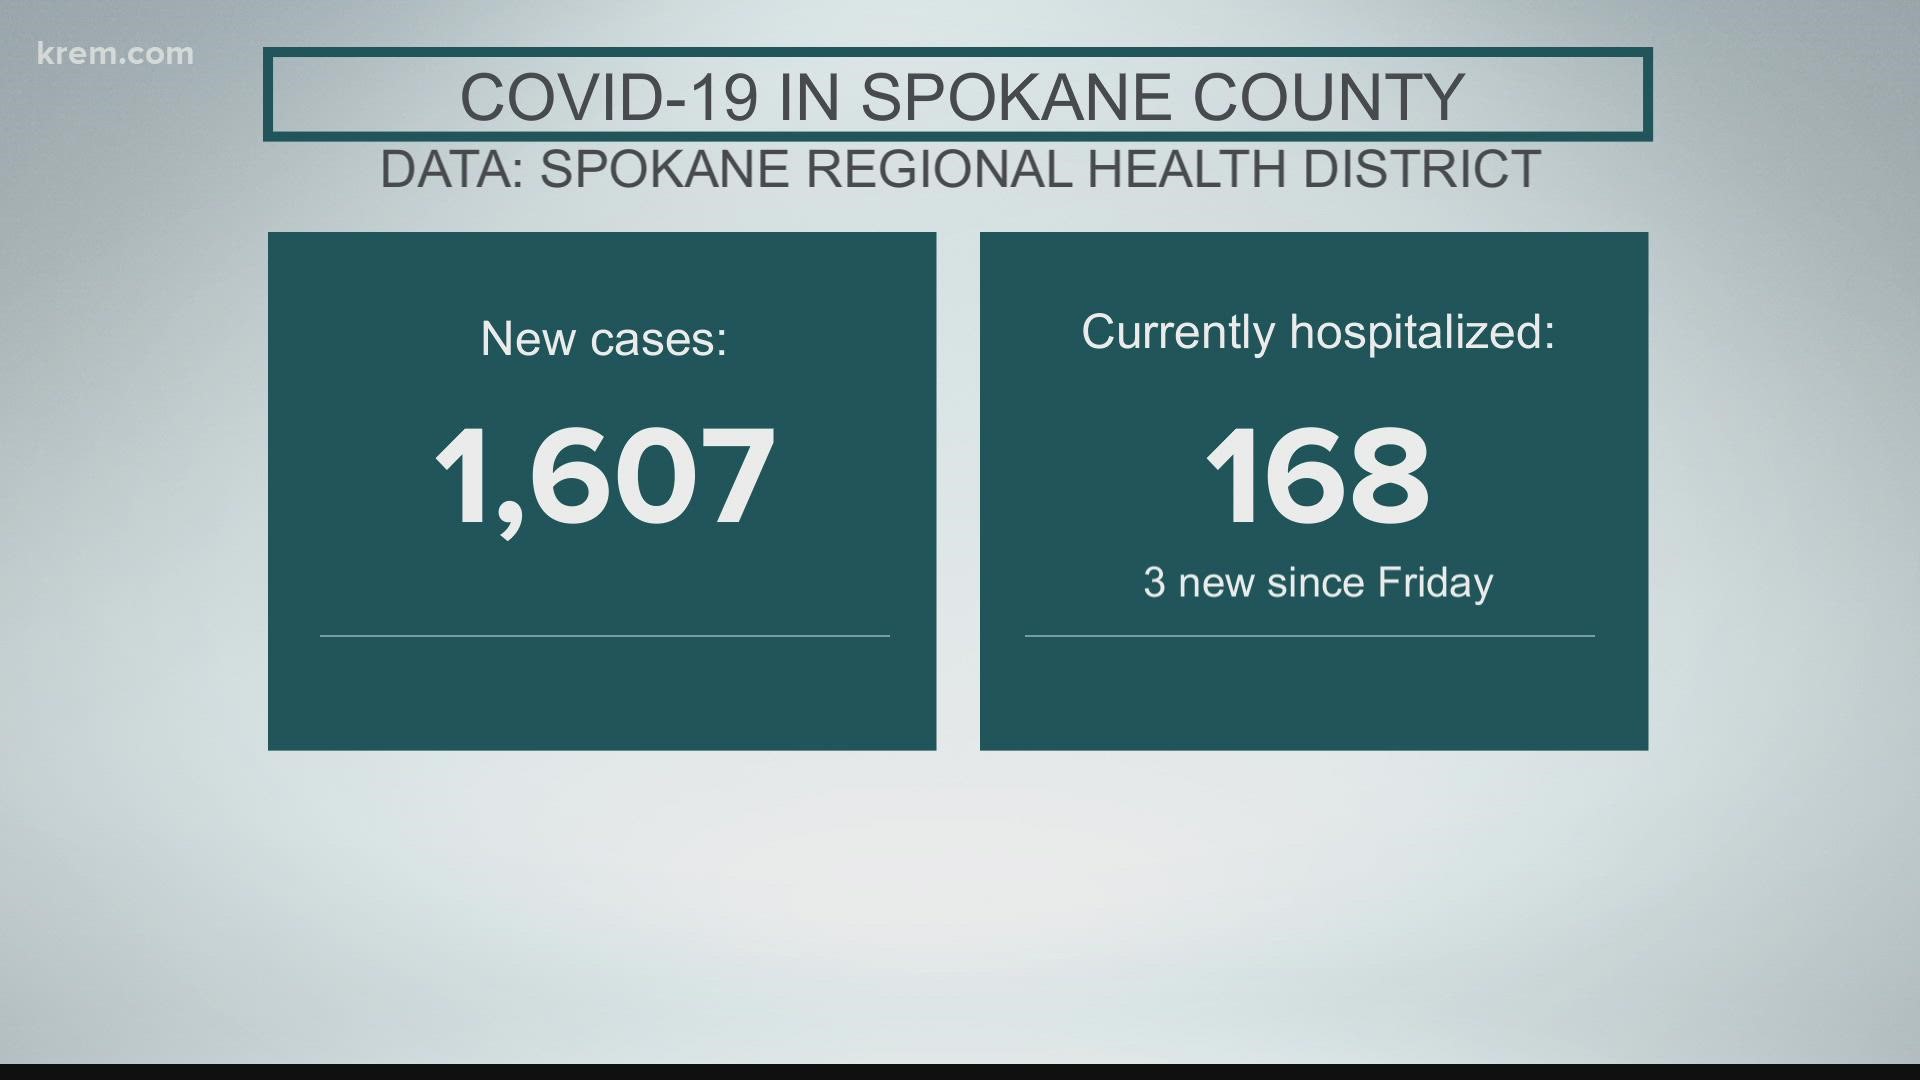 Data from the Panhandle Health District reported 453 new Covid cases as of Jan. 24, and the Spokane Regional Health District reported 1,607.